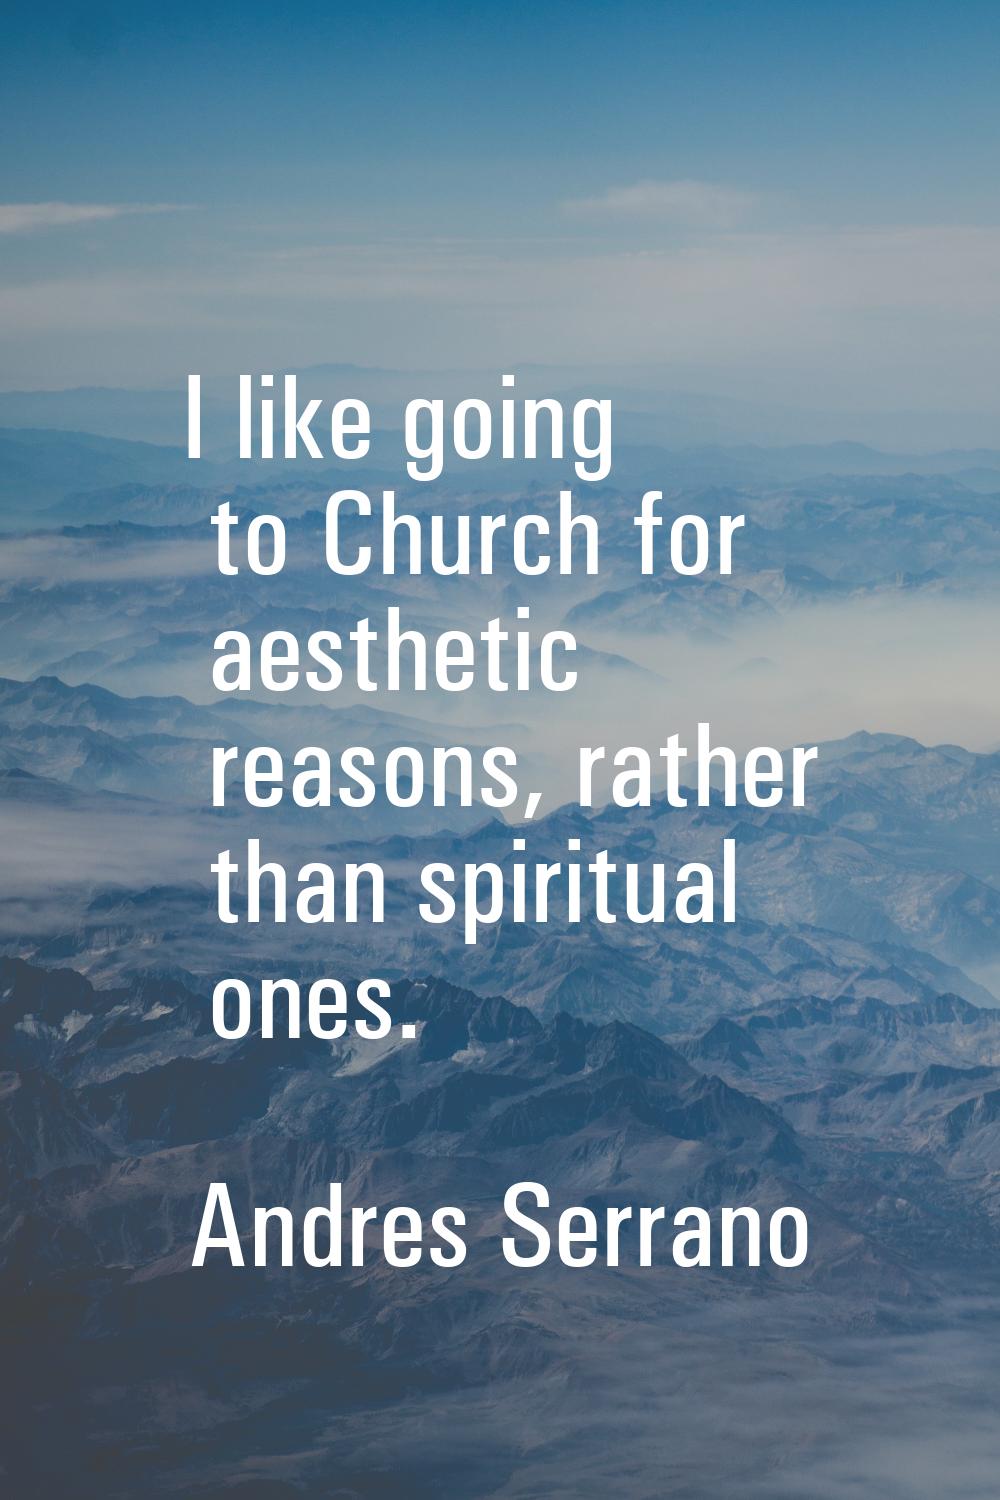 I like going to Church for aesthetic reasons, rather than spiritual ones.